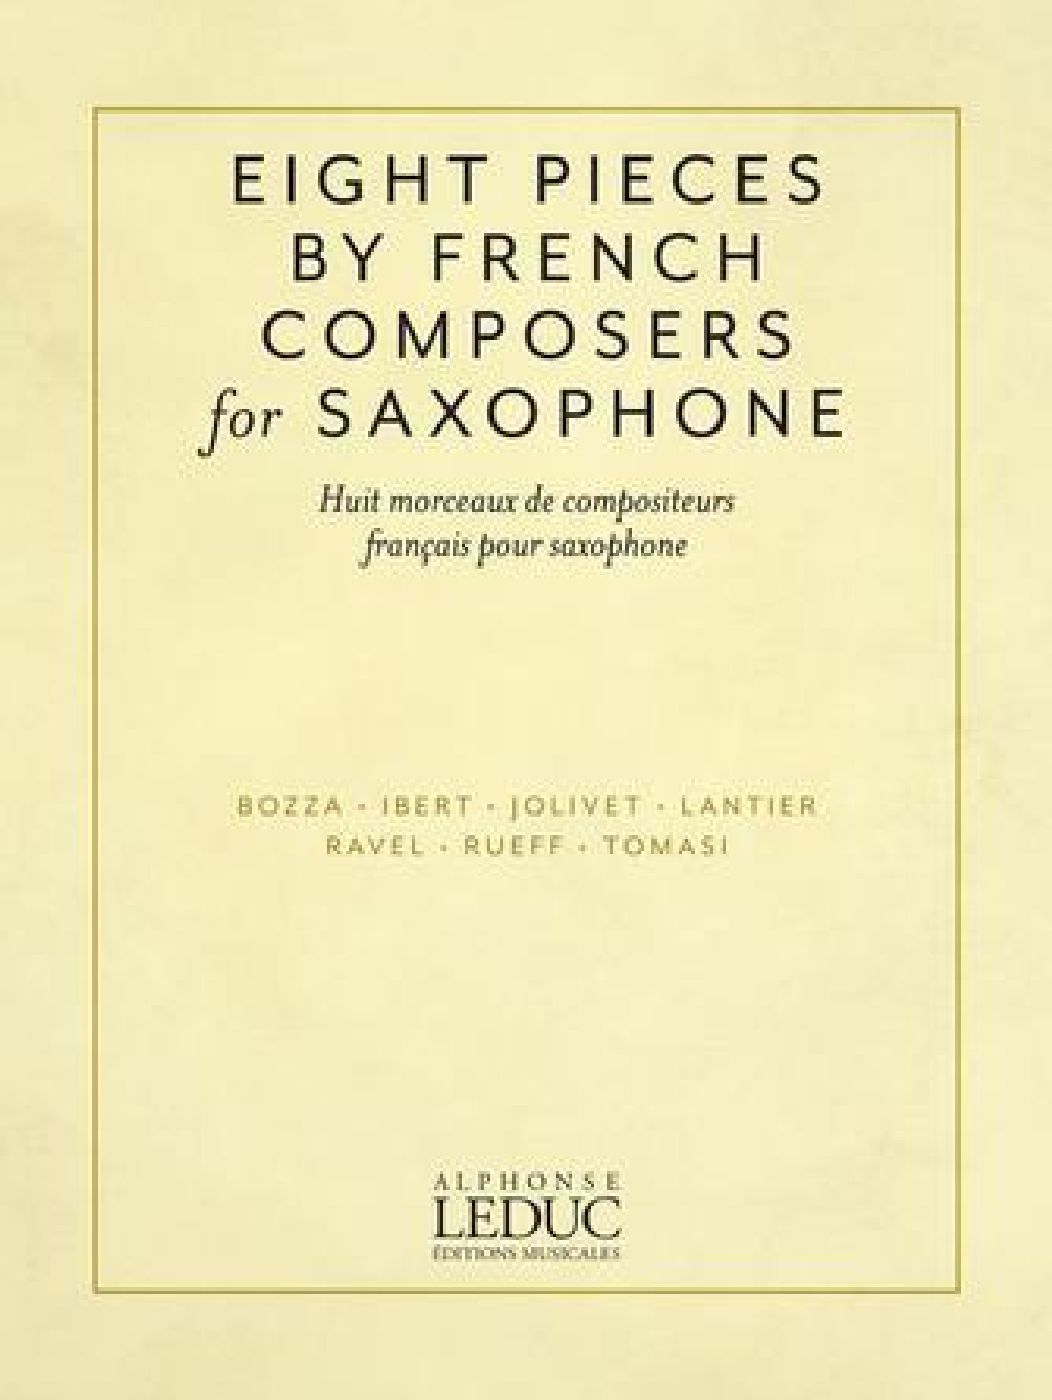 LEDUC EIGHT SAXOPHONE PIECES BY FRENCH COMPOSERS